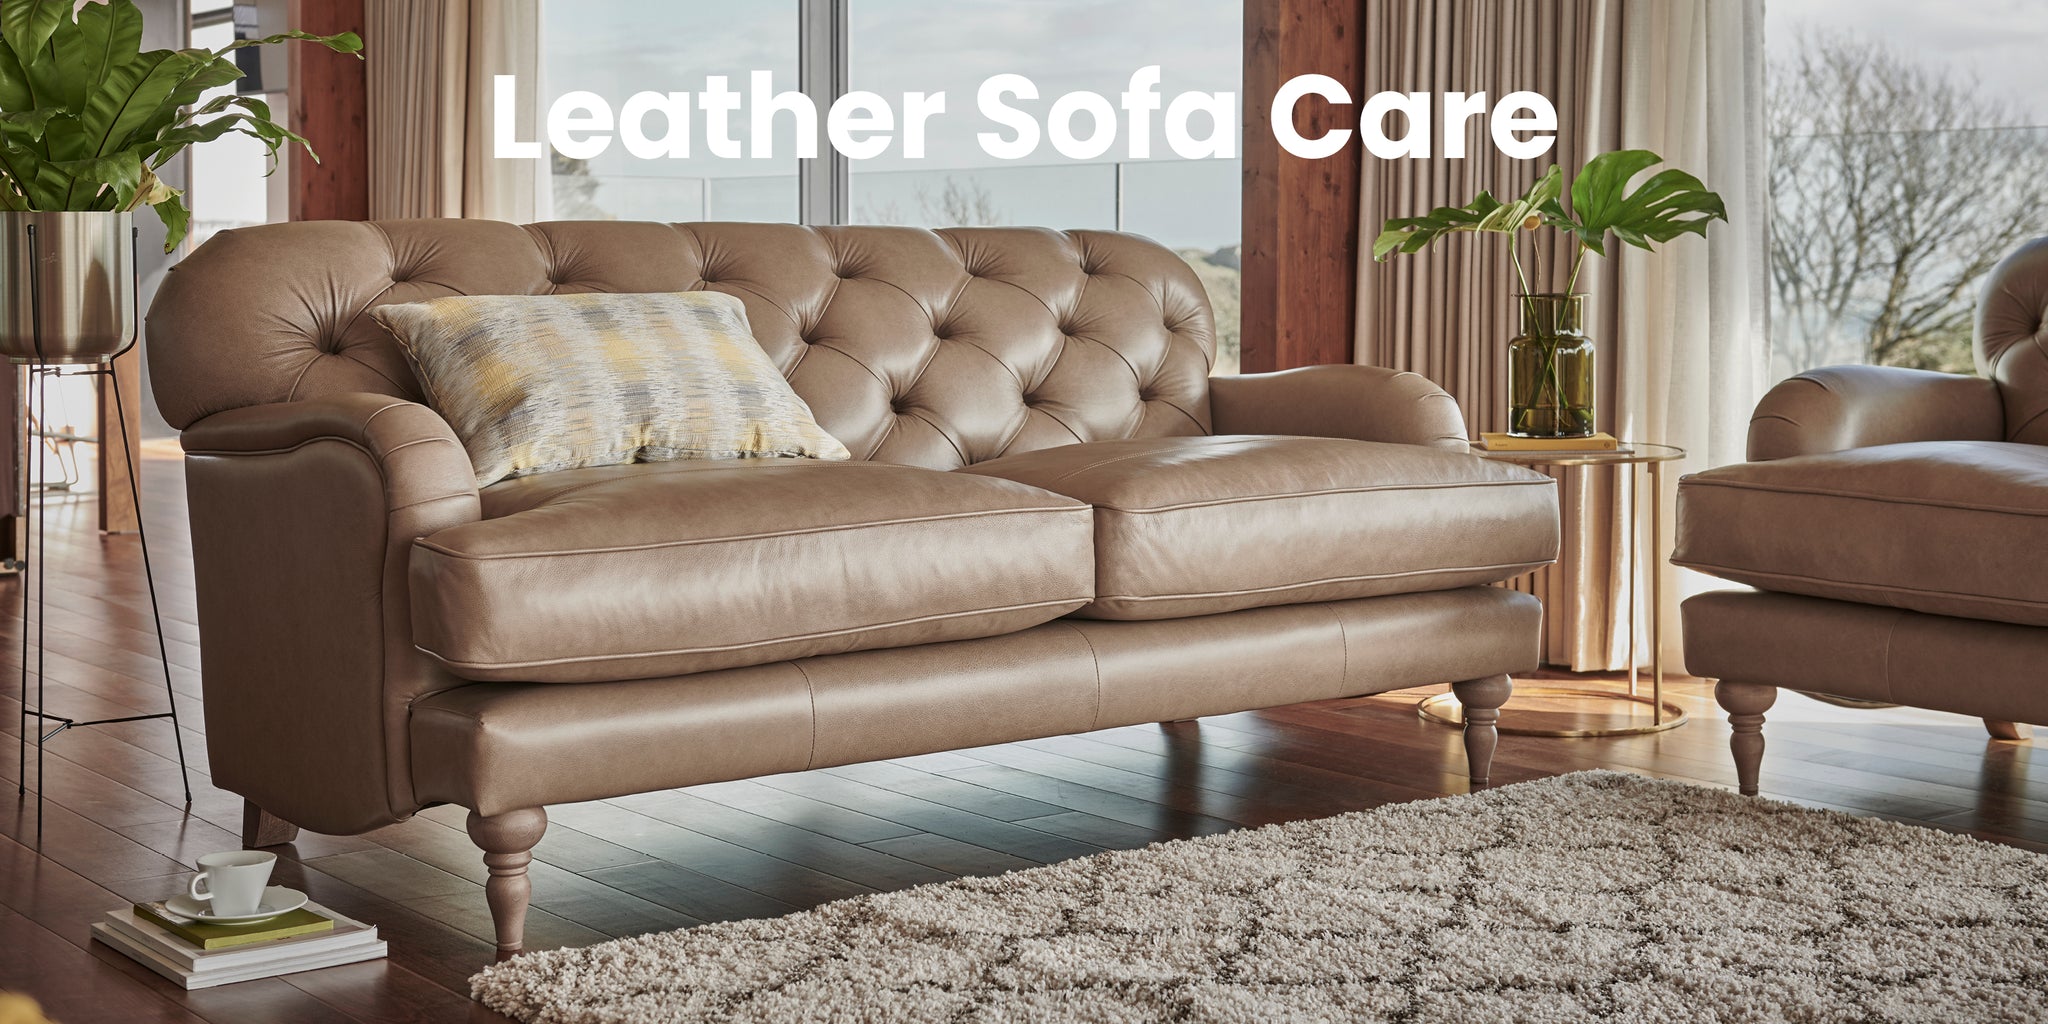 Homemade Leather Sofa Cleaner - Our Oily House